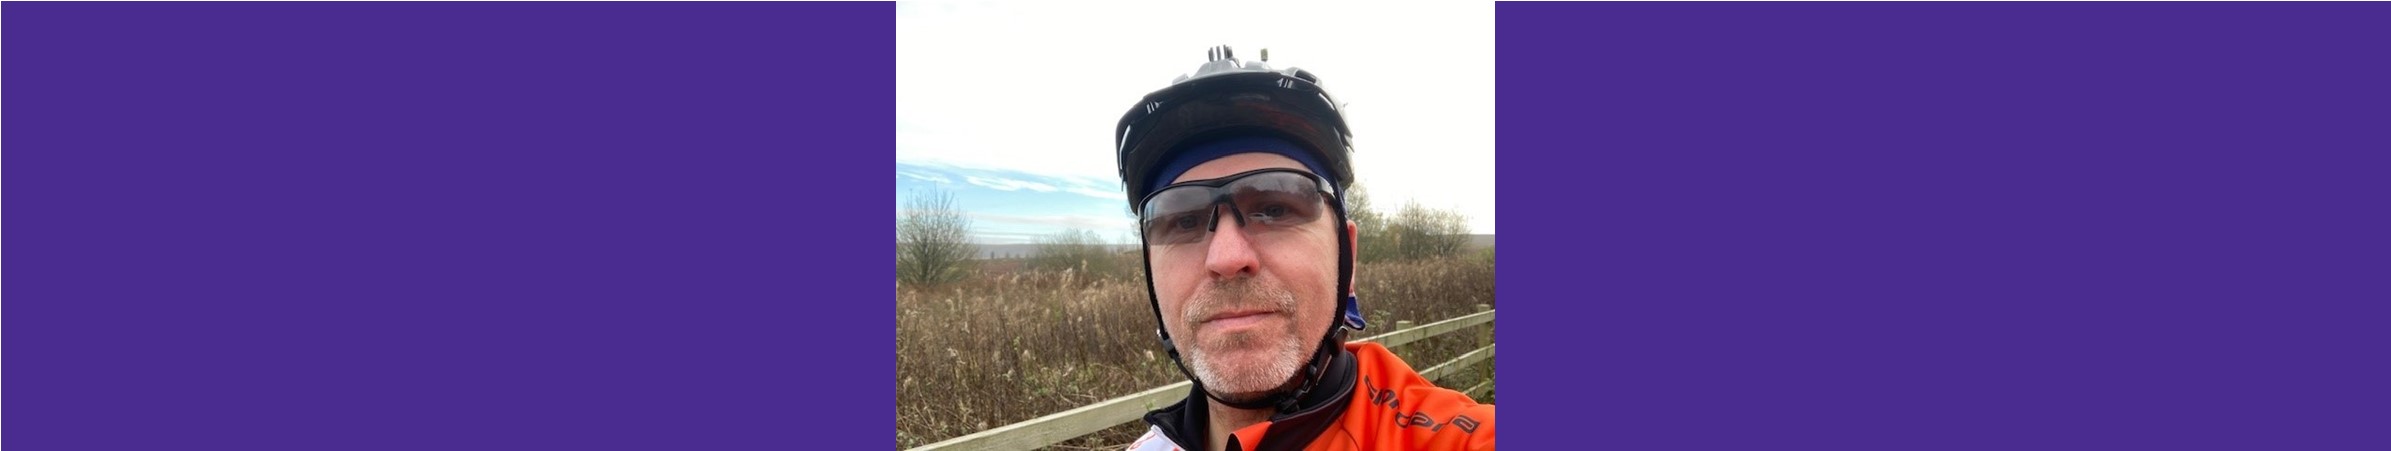 Photo of Kevin wearing cycling gear, sunglasses and a helmet out in the countryside.